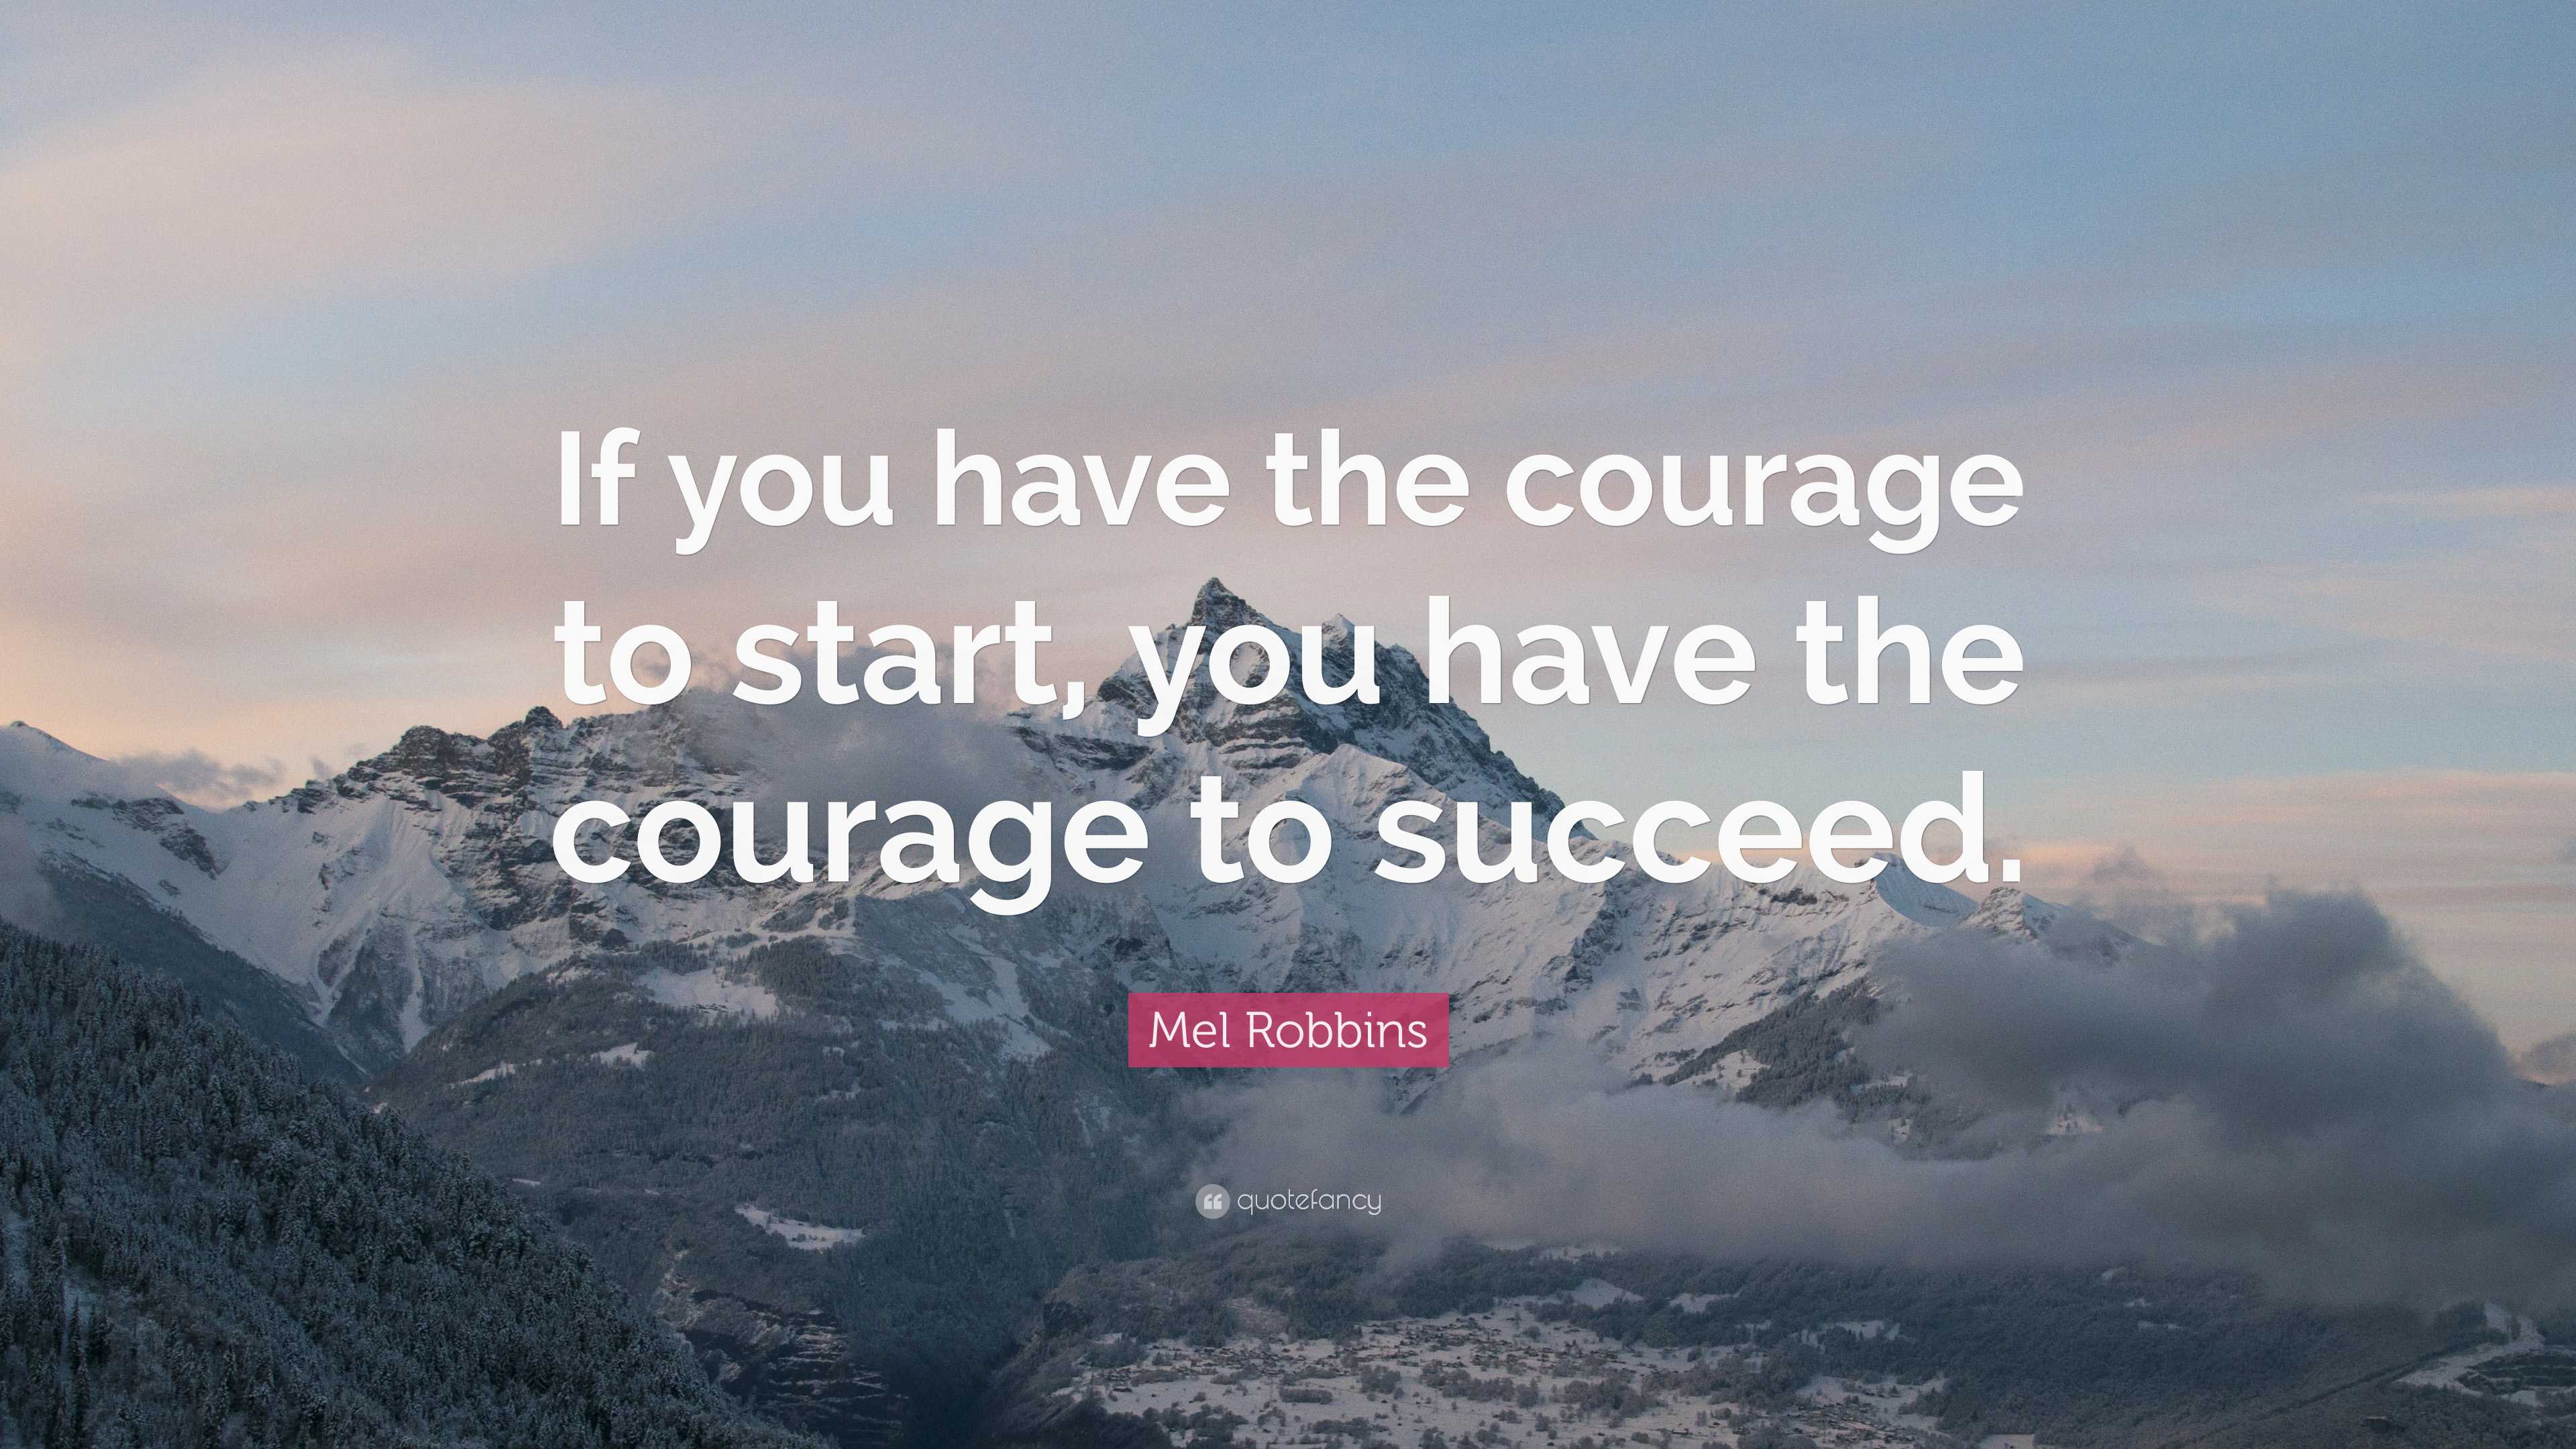 Mel Robbins Quote: “If you have the courage to start, you have the ...